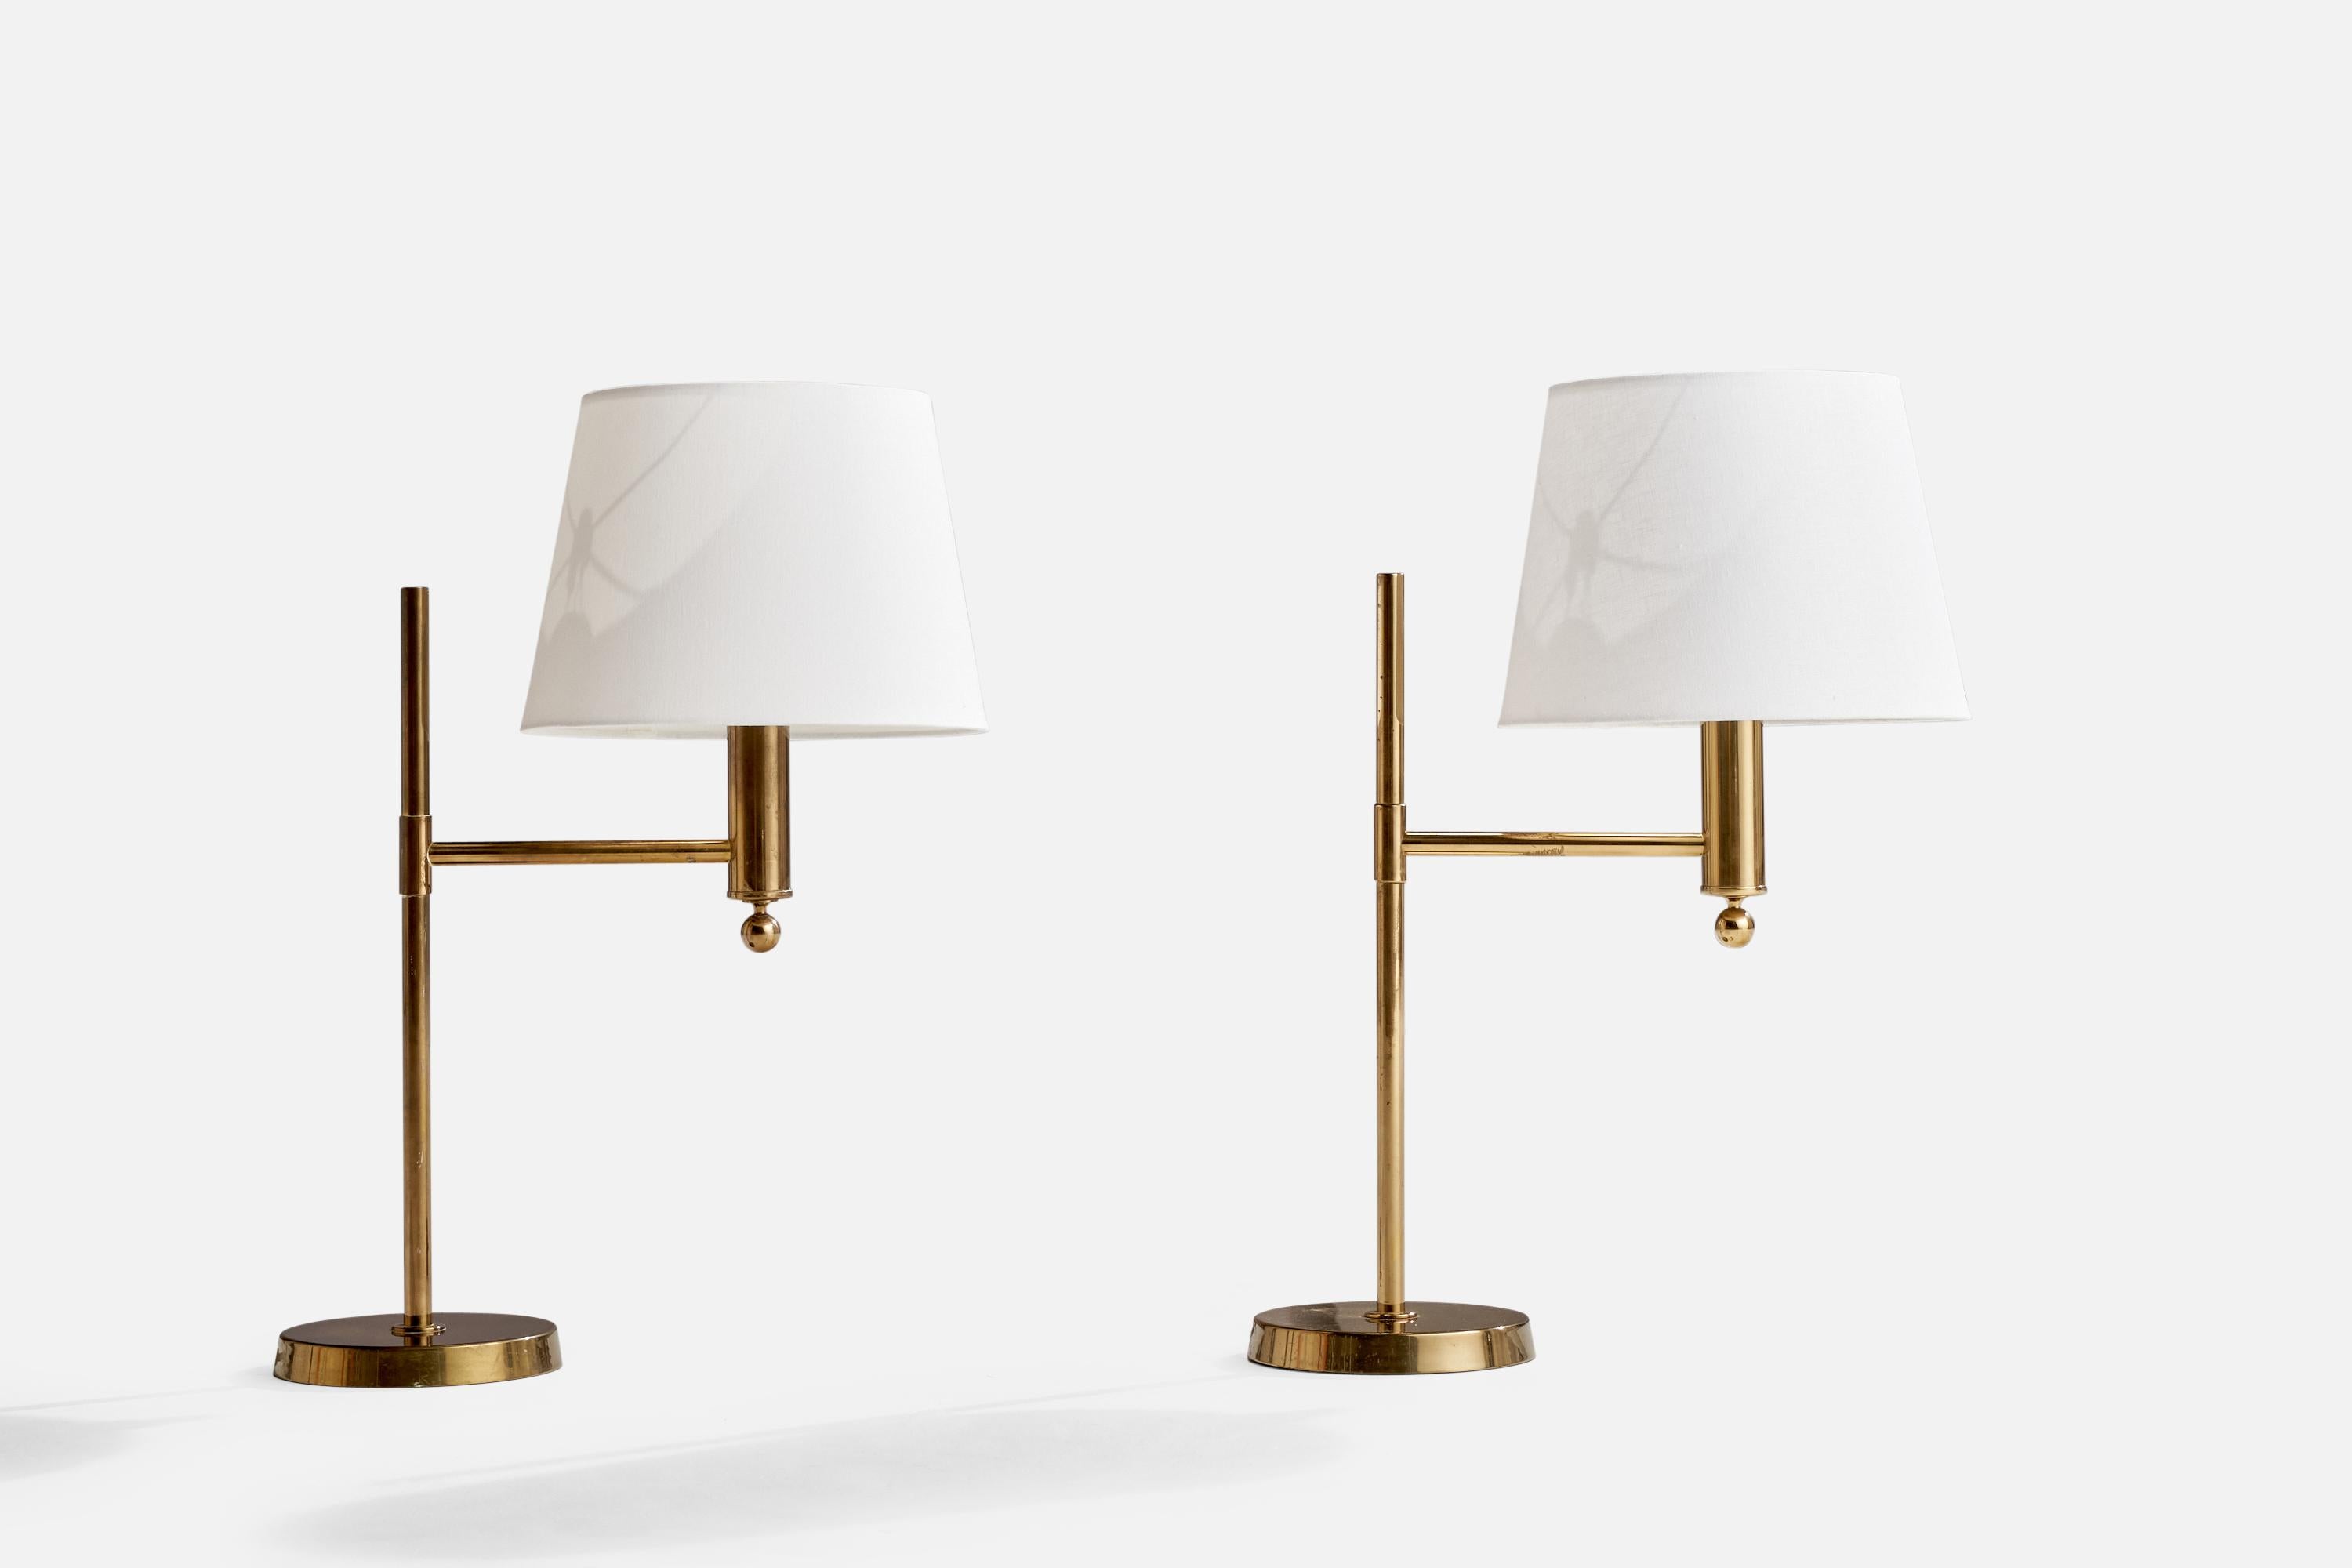 A pair of brass table lamps designed and produced by Bergboms, Sweden, c. 1970s.

Overall Dimensions (inches): 25”  H x 12”  W x 18” D
Stated dimensions include shade.
Bulb Specifications: E-26 Bulb
Number of Sockets: 2
All lighting will be